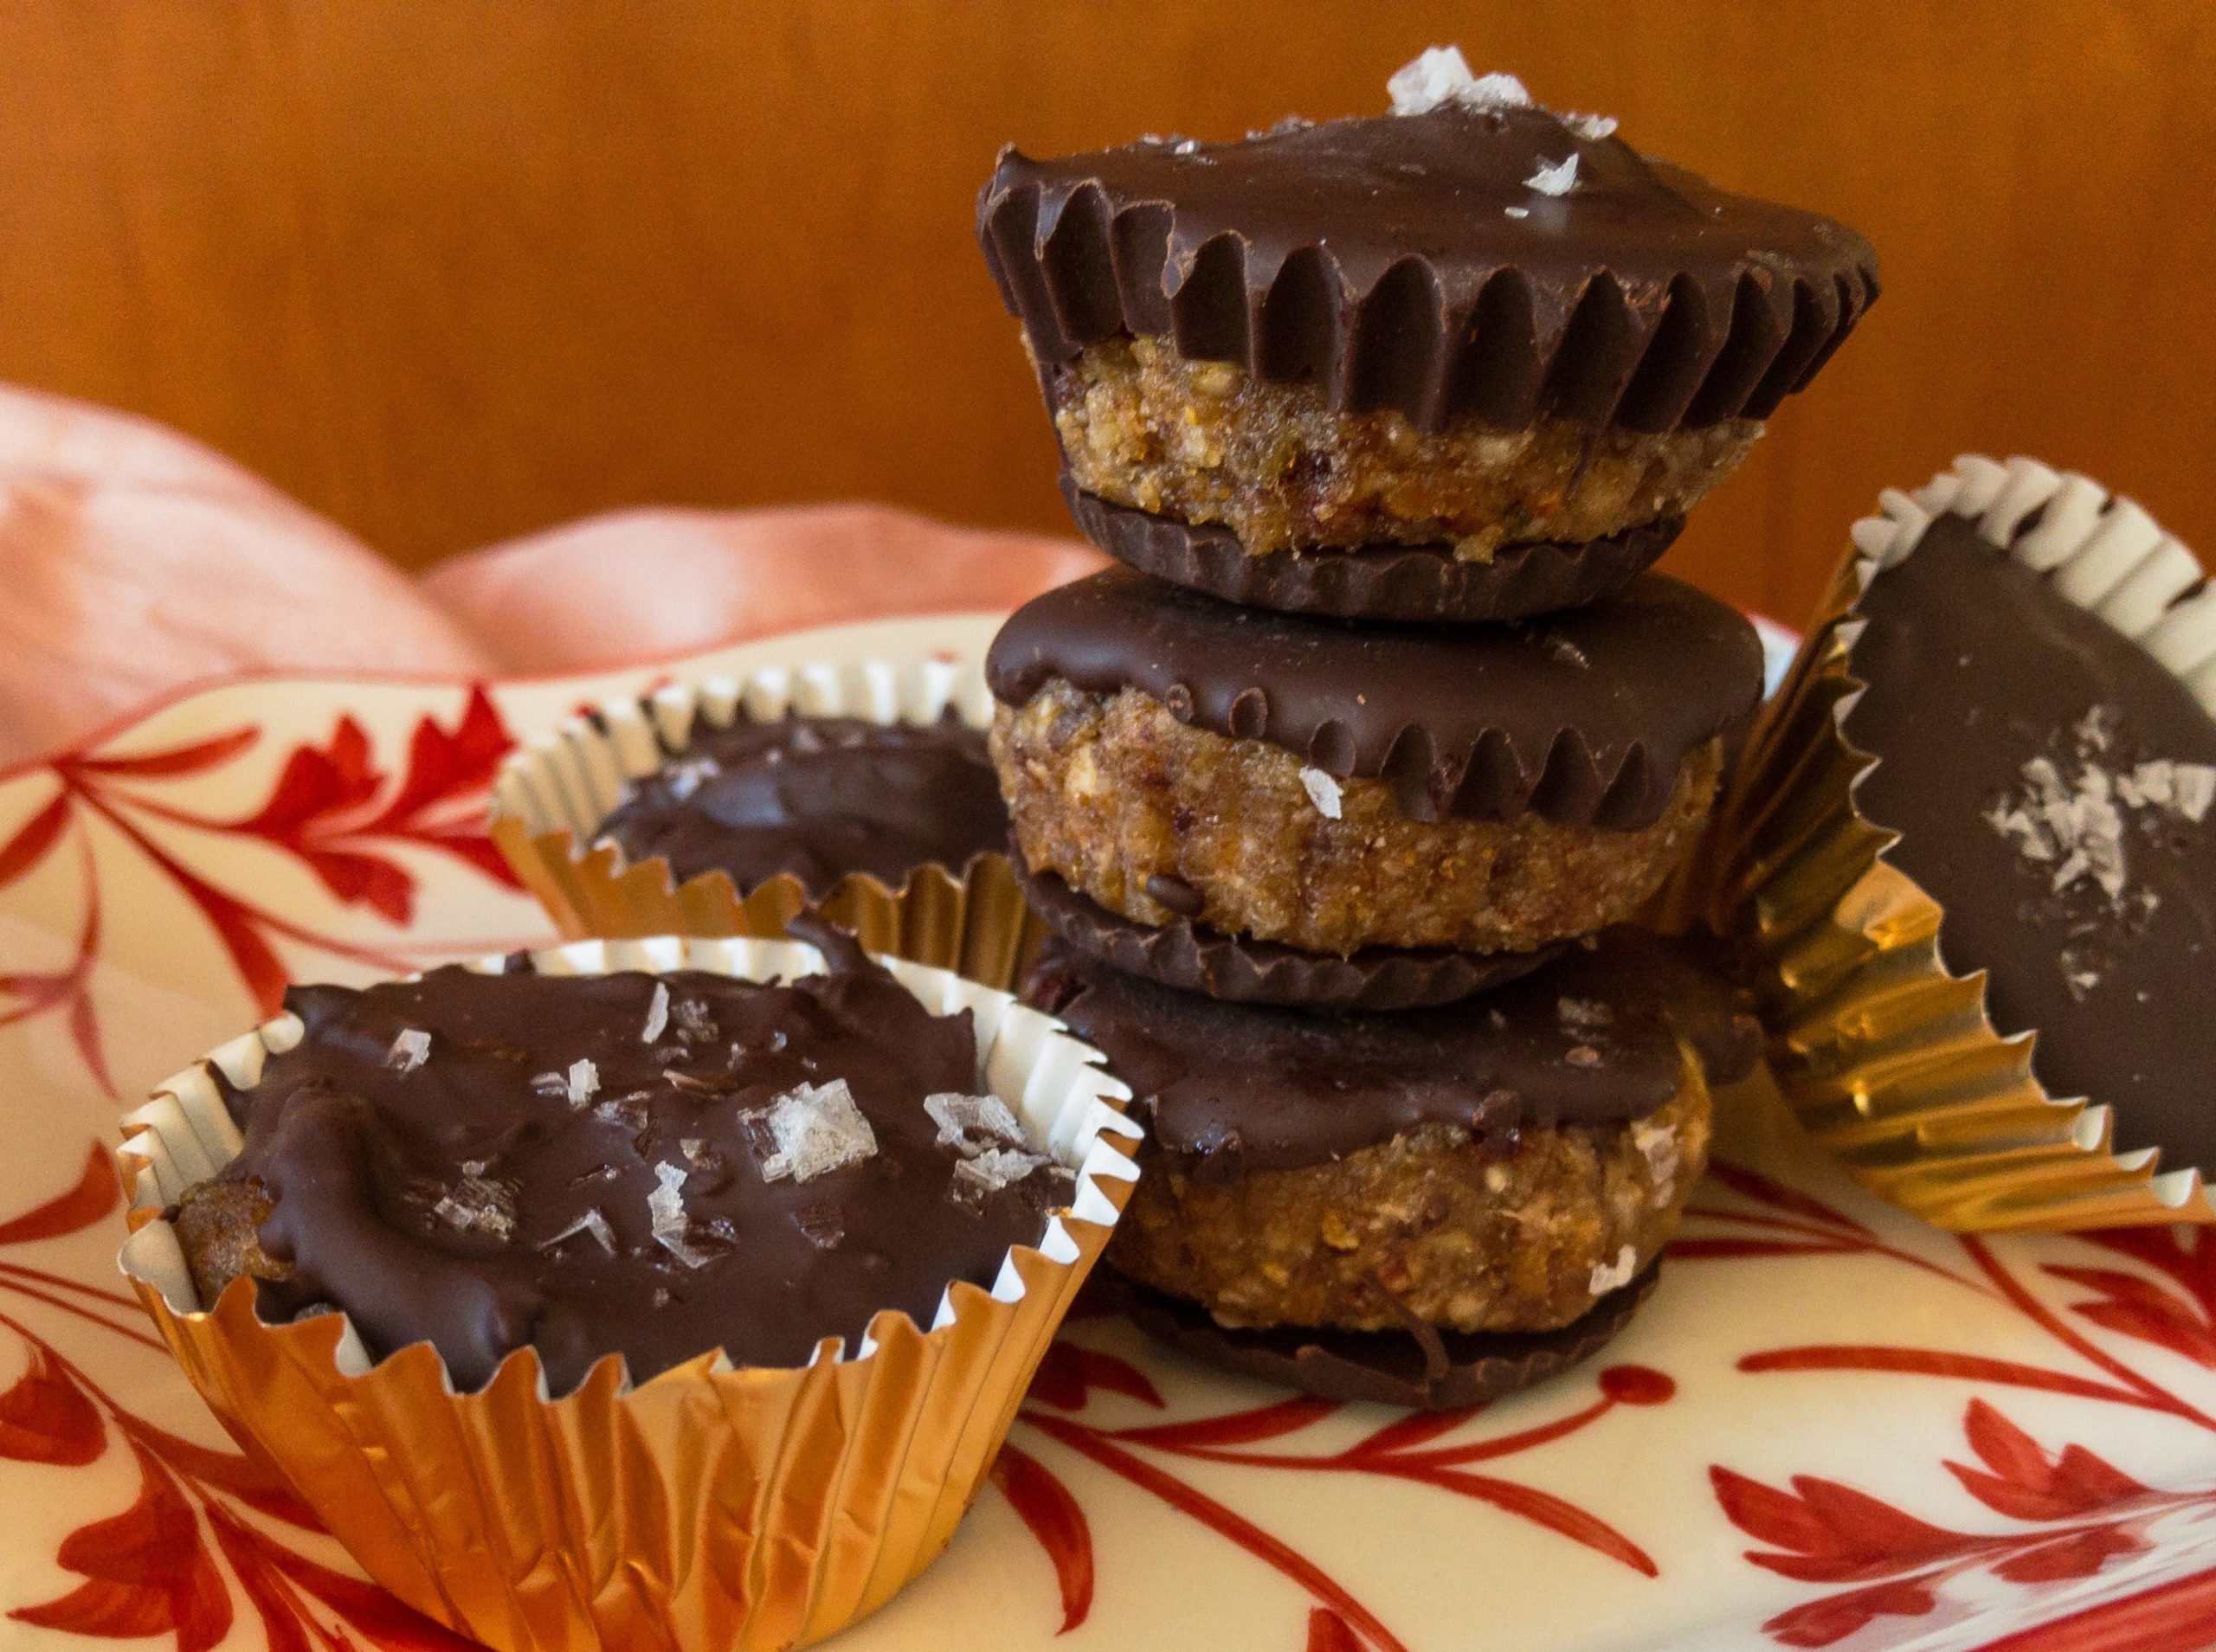 Salted chocolate nut cups